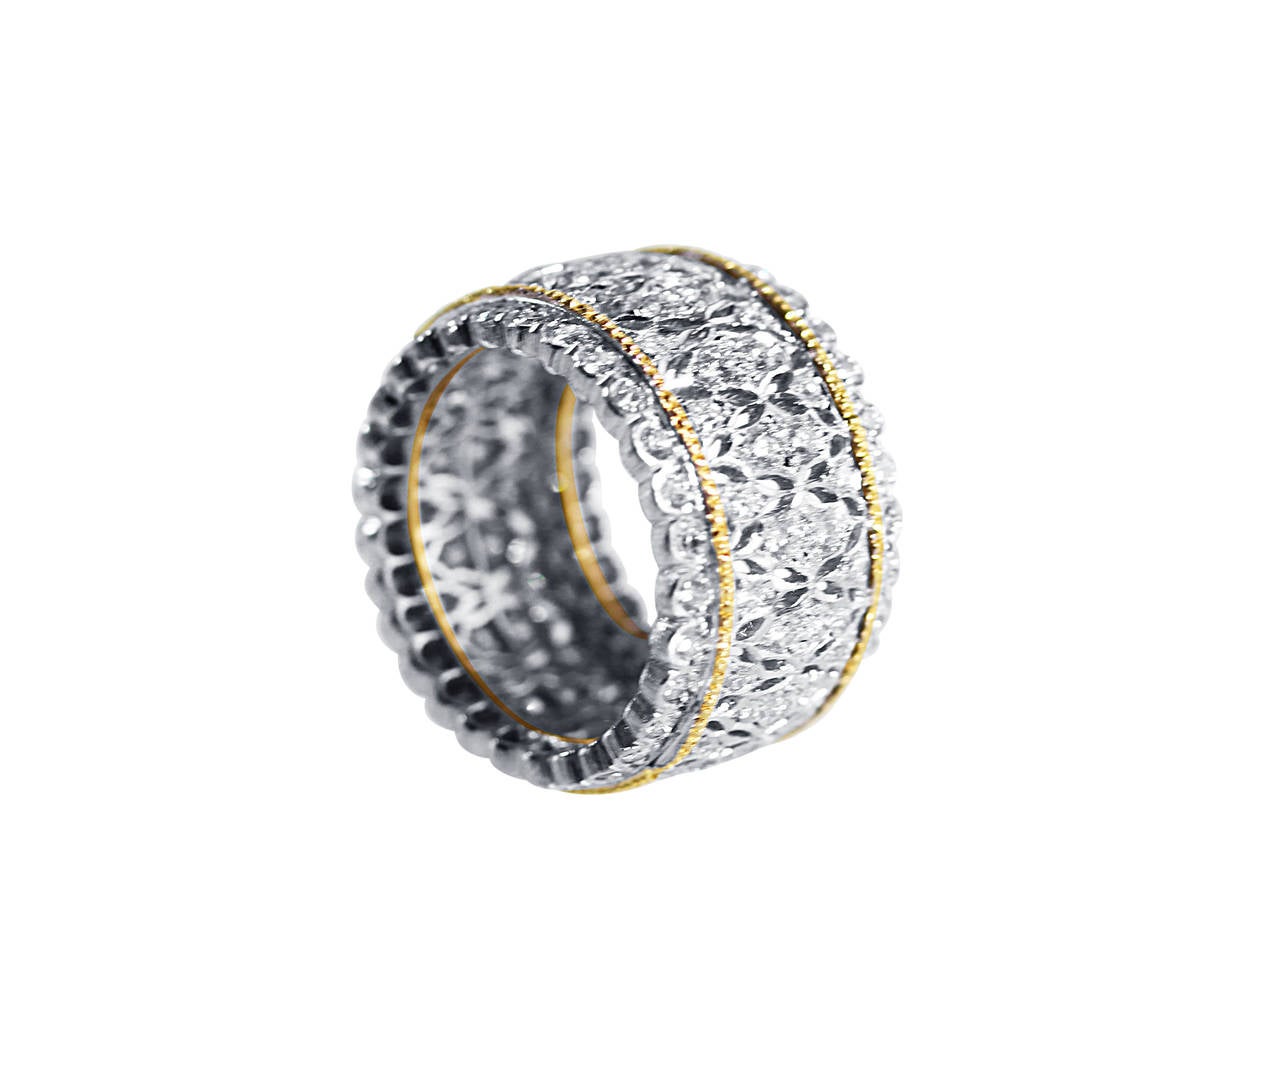 An 18 karat white and yellow gold and diamond band ring by Buccellati, Italy, the wide band of openwork tulle design set throughout with 126 round diamonds weighing approximately 2.85 carats, gross weight 11.1 grams, size 6 1/4, measuring 7/8 by 1/2